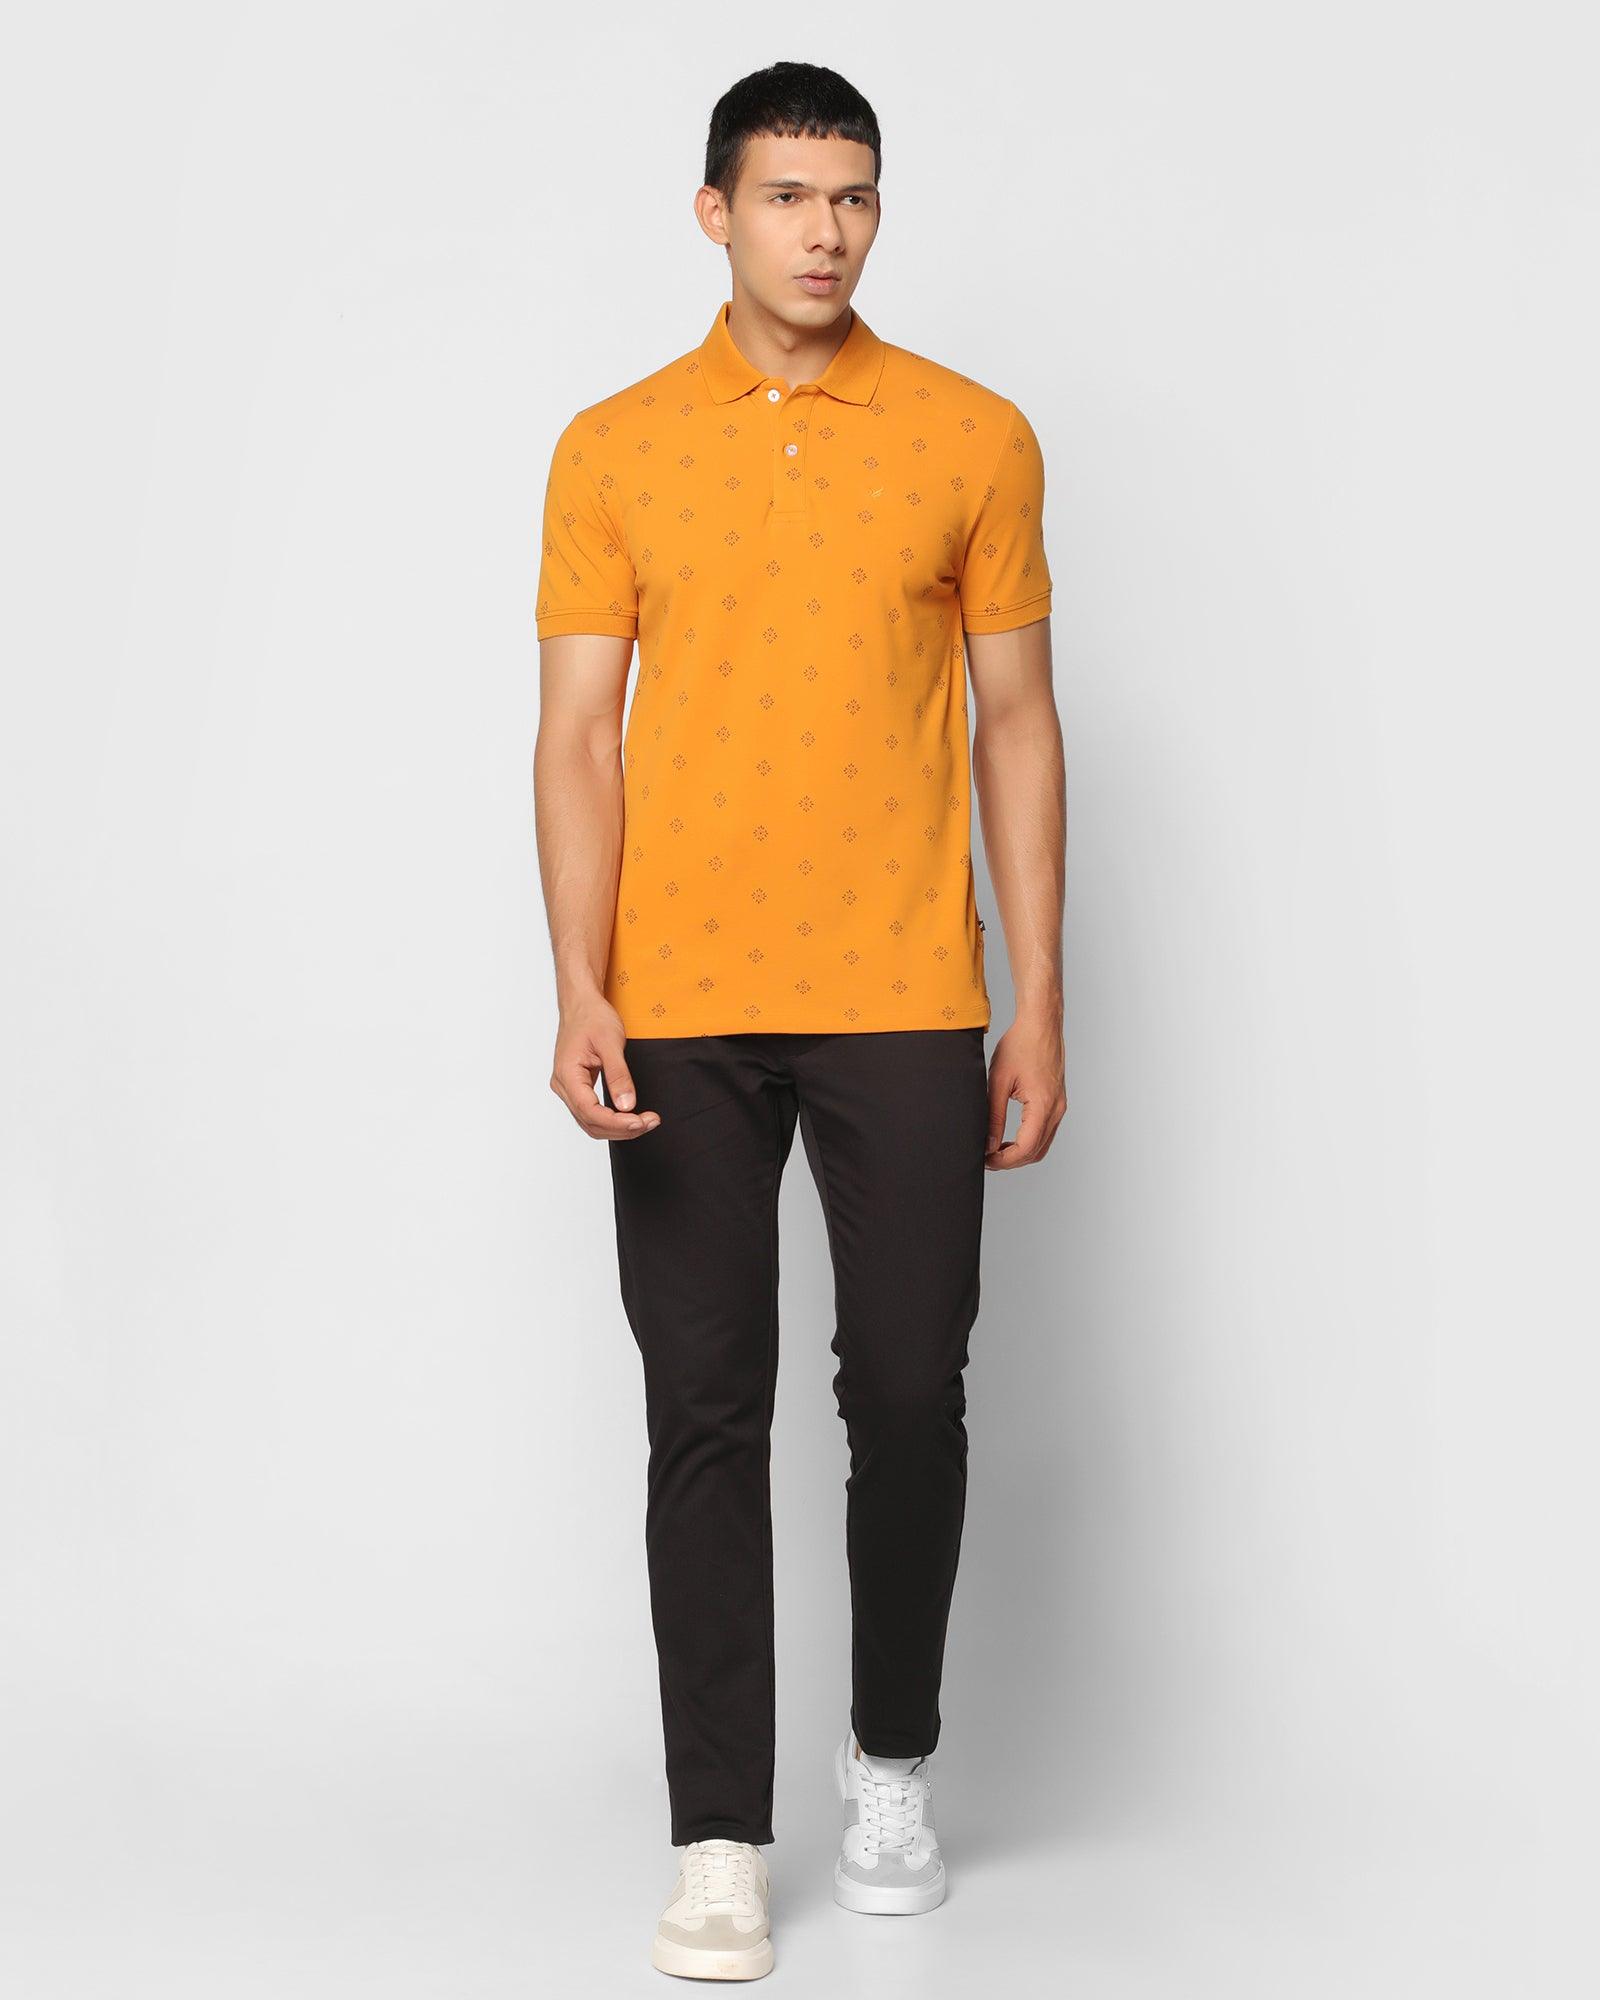 Polo Mustard Yellow Printed T Shirt - Jervin